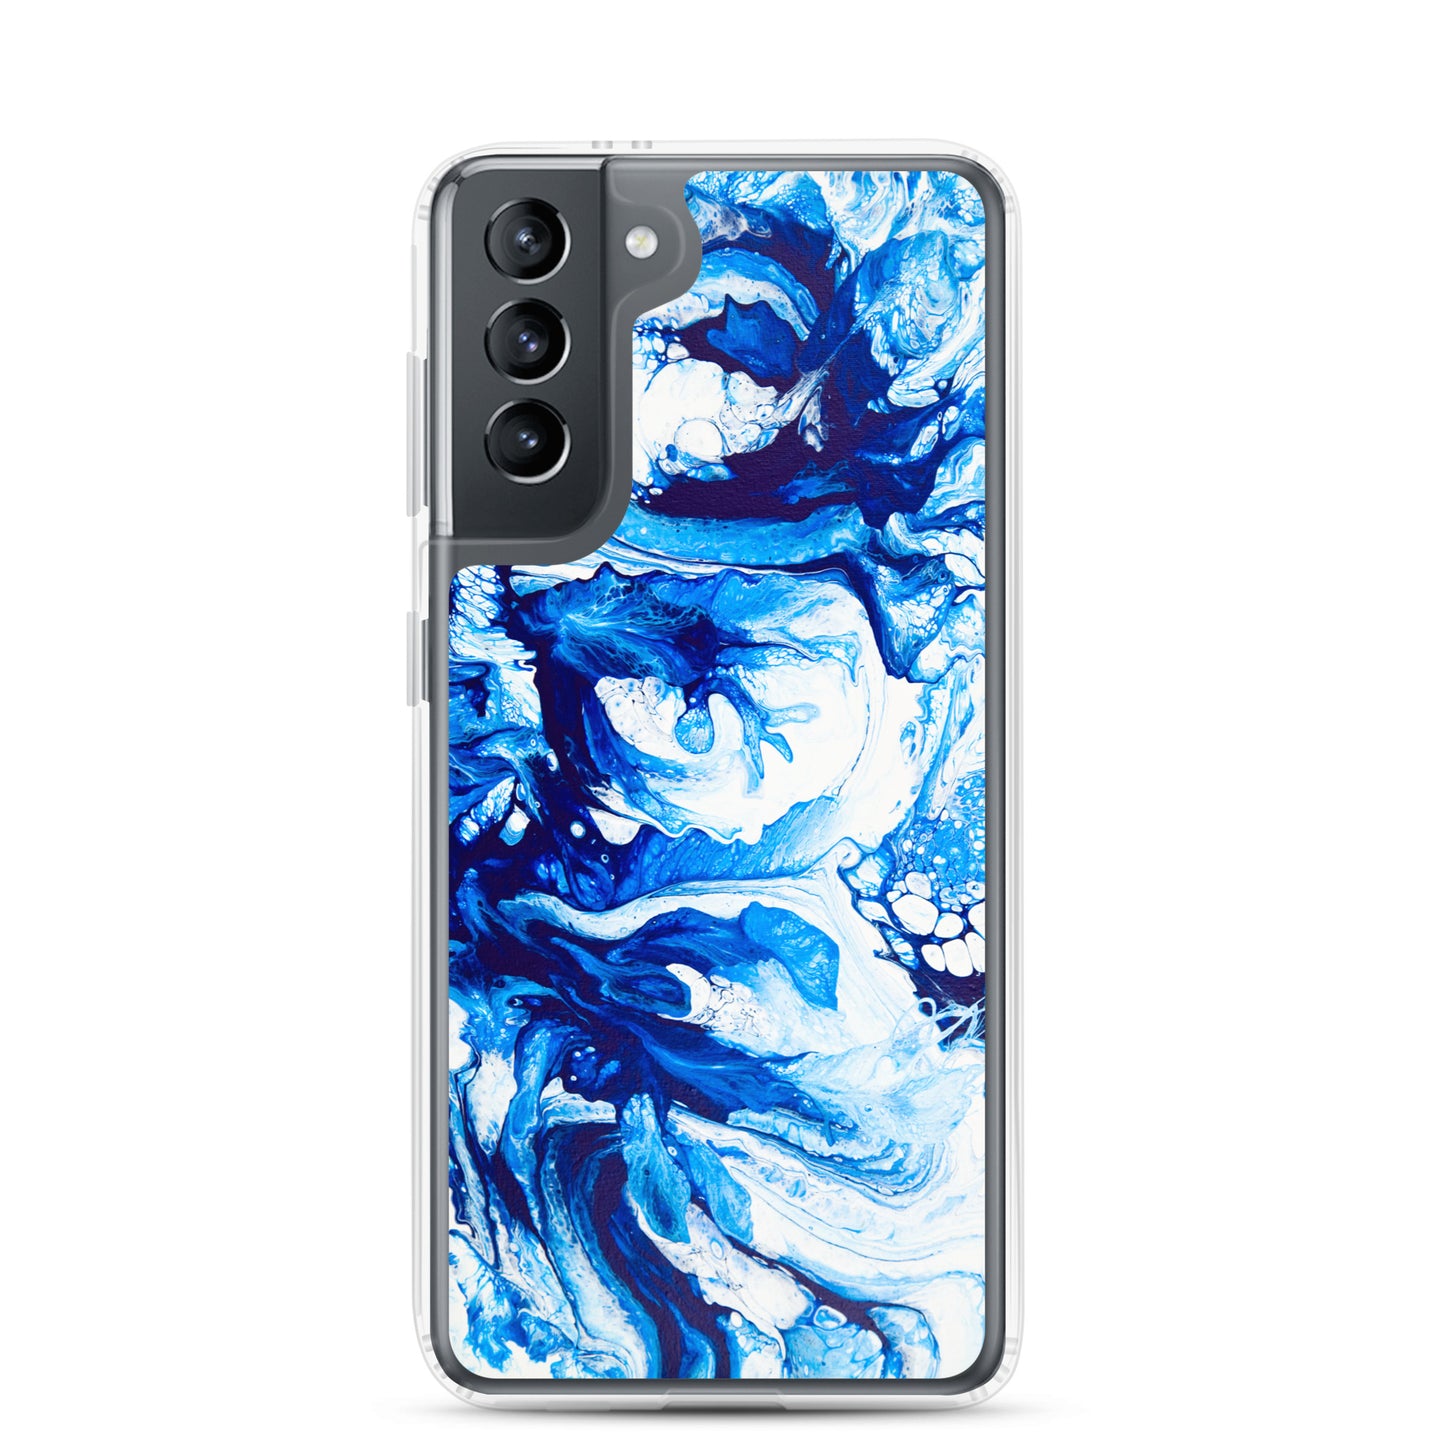 NightOwl Studio Custom Phone Case Compatible with Samsung Galaxy, Slim Cover for Wireless Charging, Drop and Scratch Resistant, The Jester